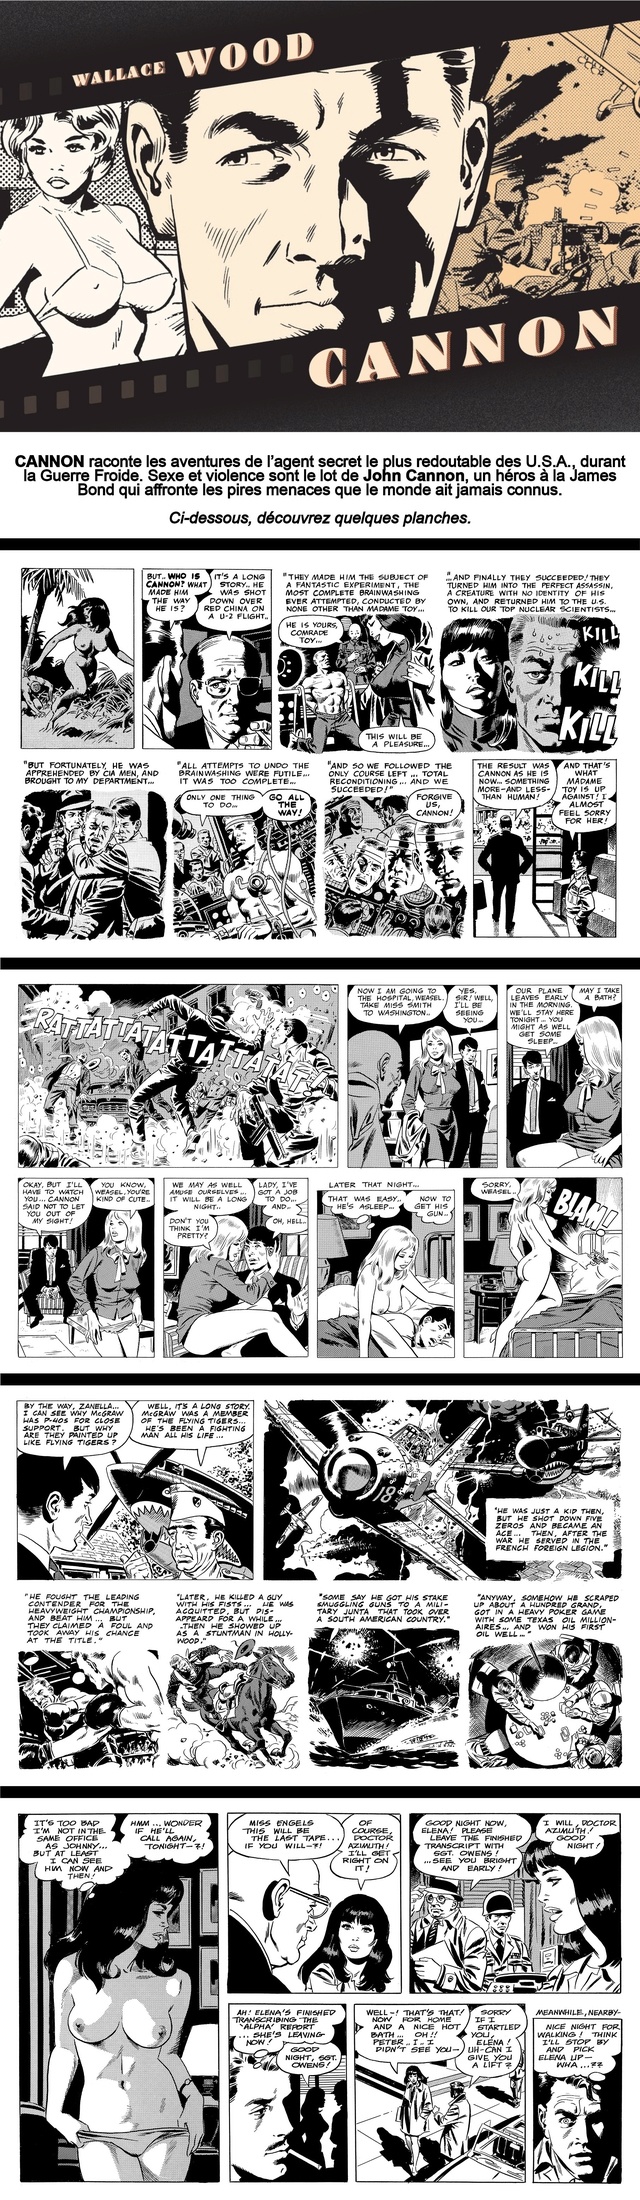 Collectionneurs de Wally Wood - Page 6 13164f10